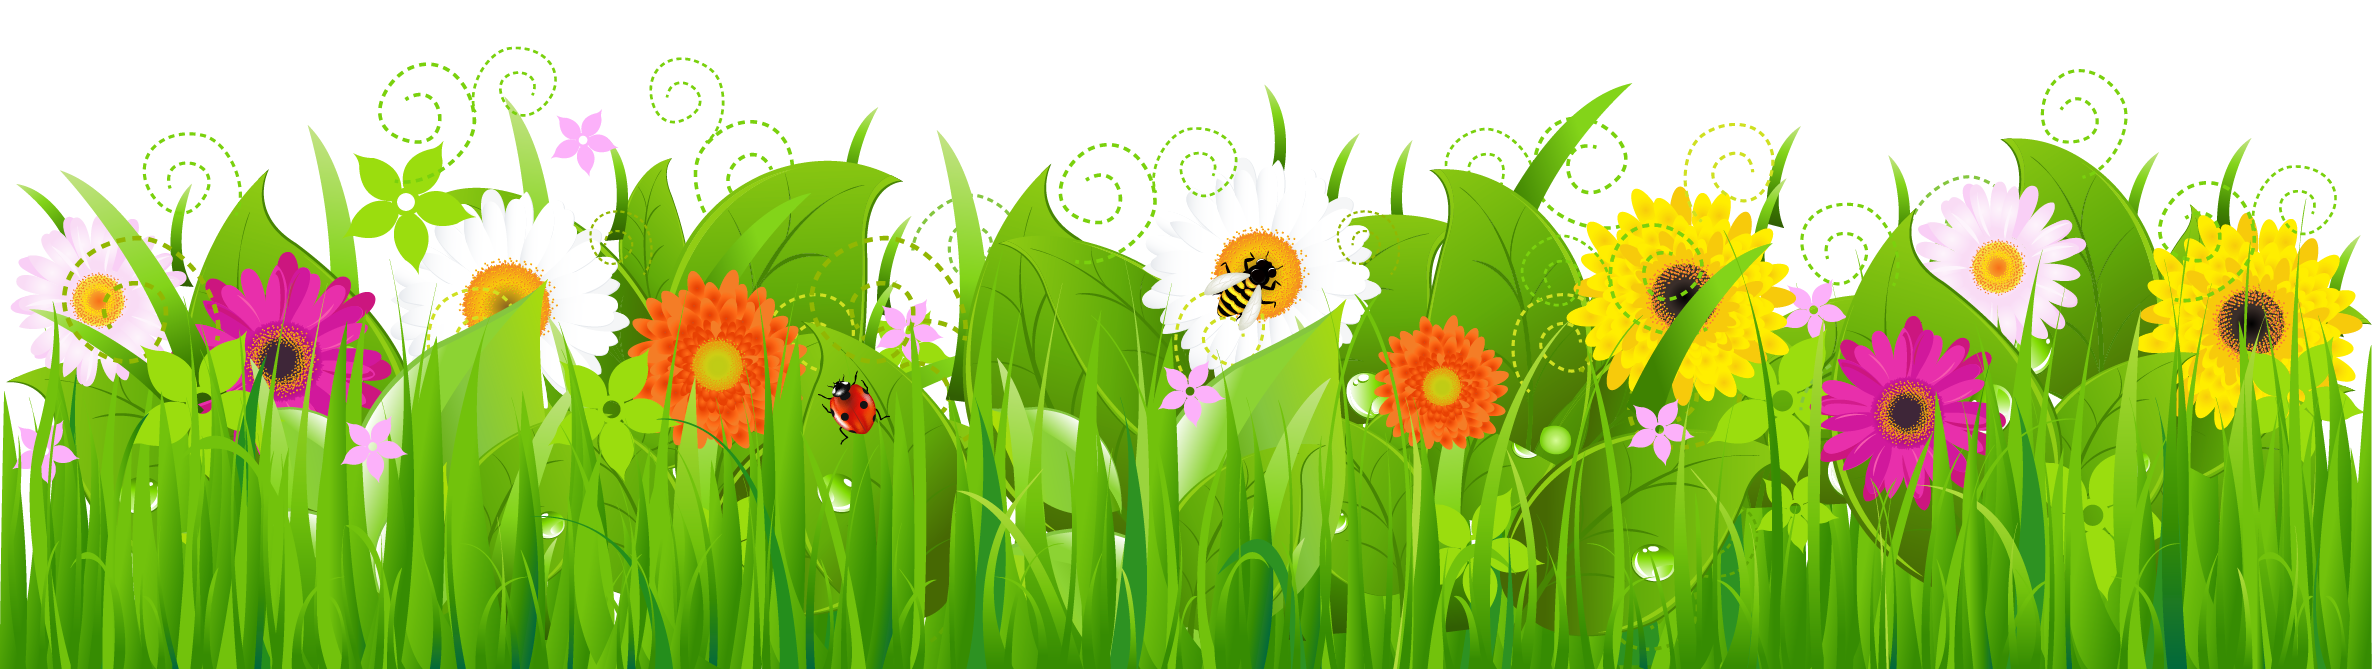 Thank you flowers clipart free clipart images - Clipartix